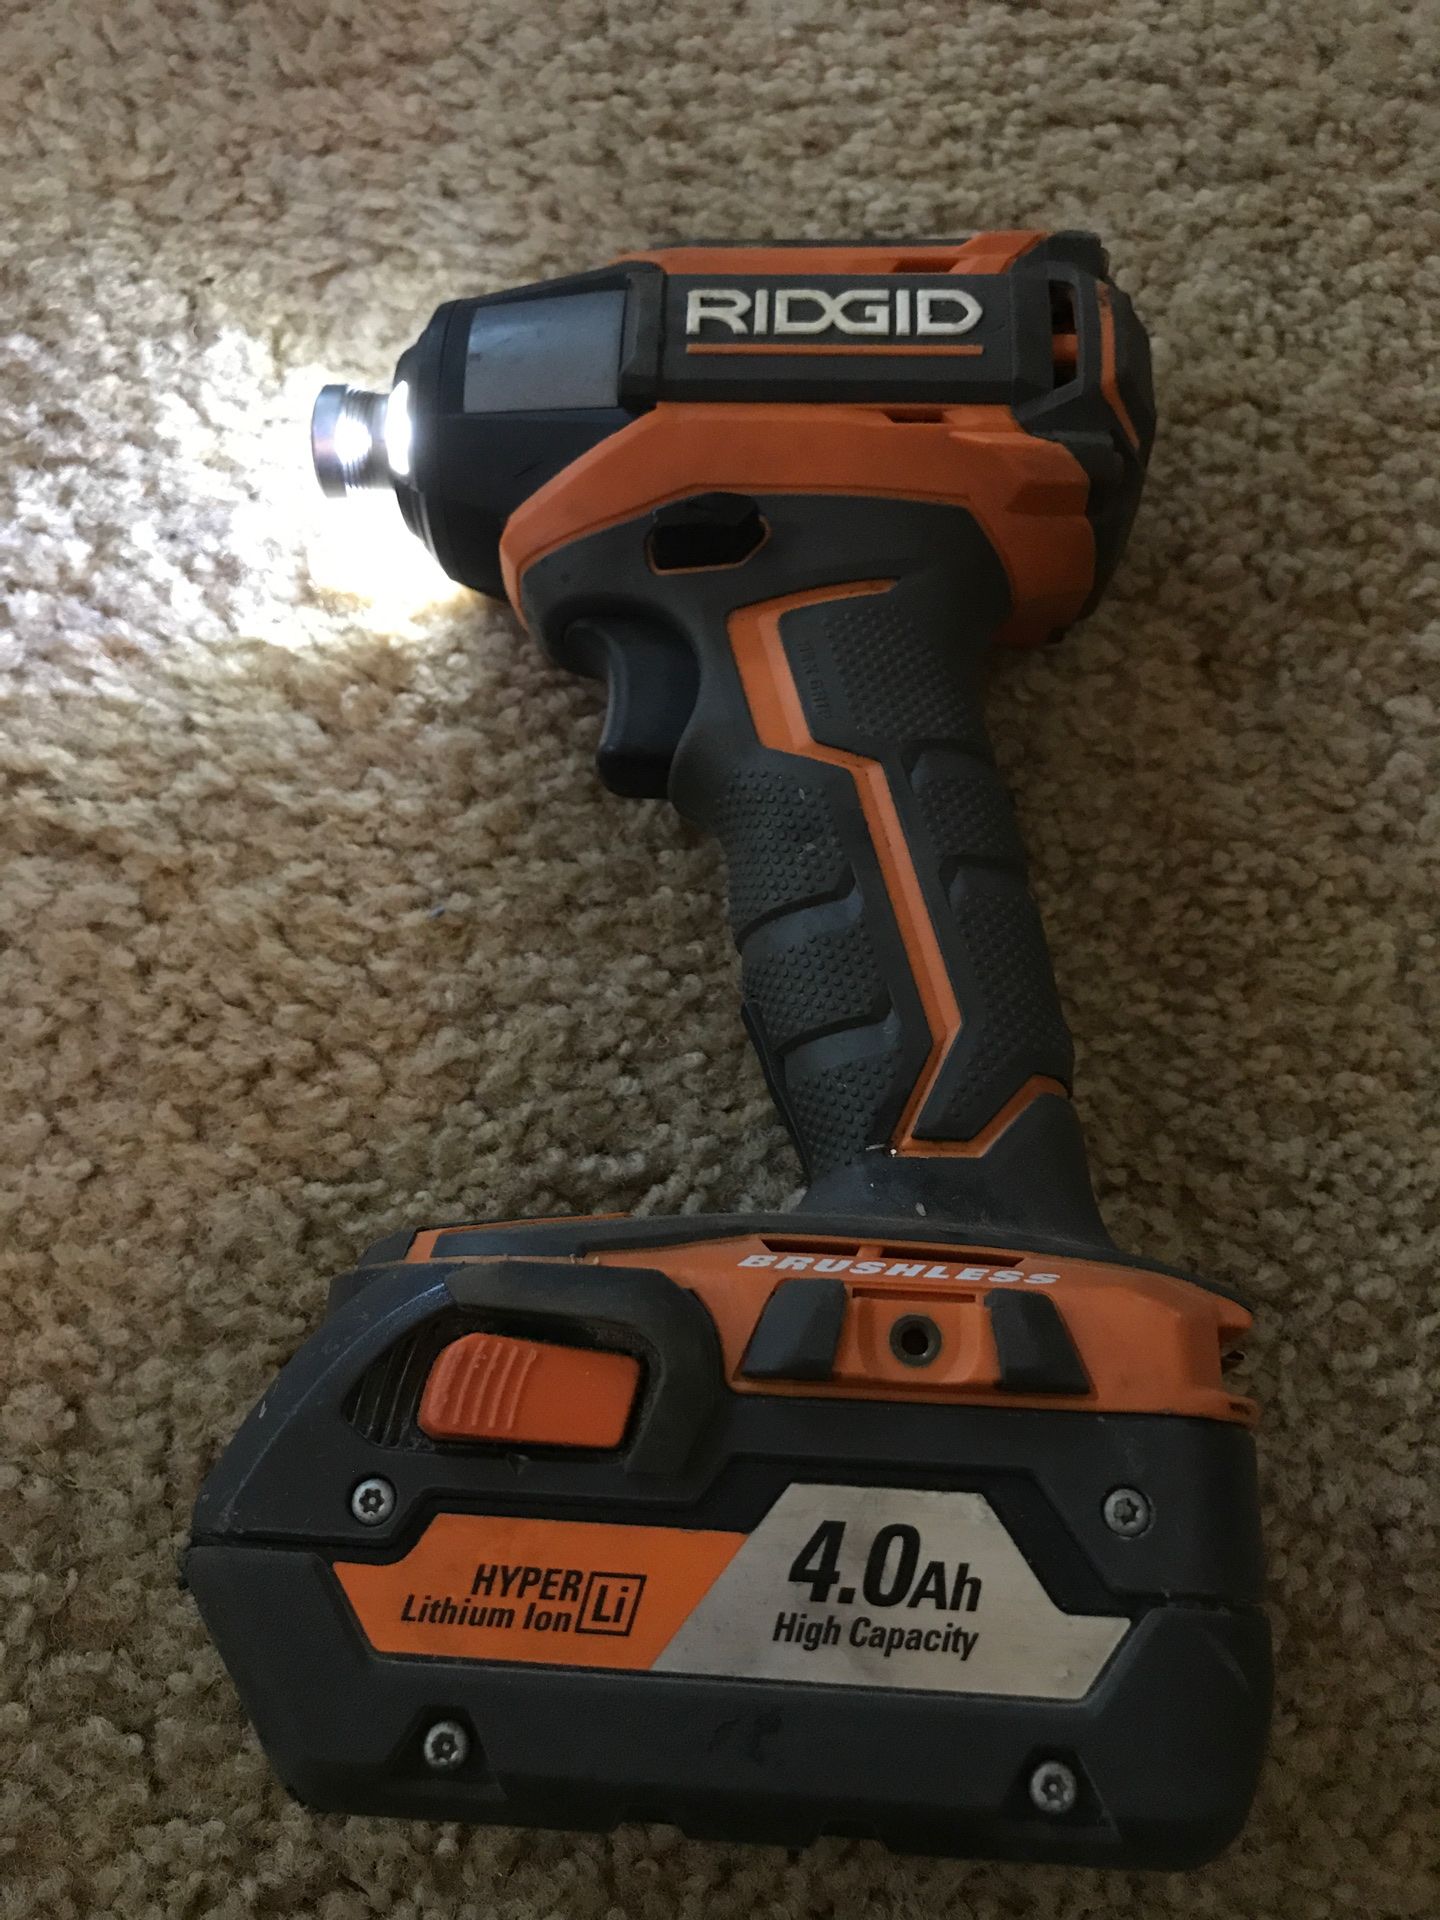 Strong-Running Lightly Used Ridgid Gen5X Brushless Impact Driver with 4.0Ah Battery and Charger.